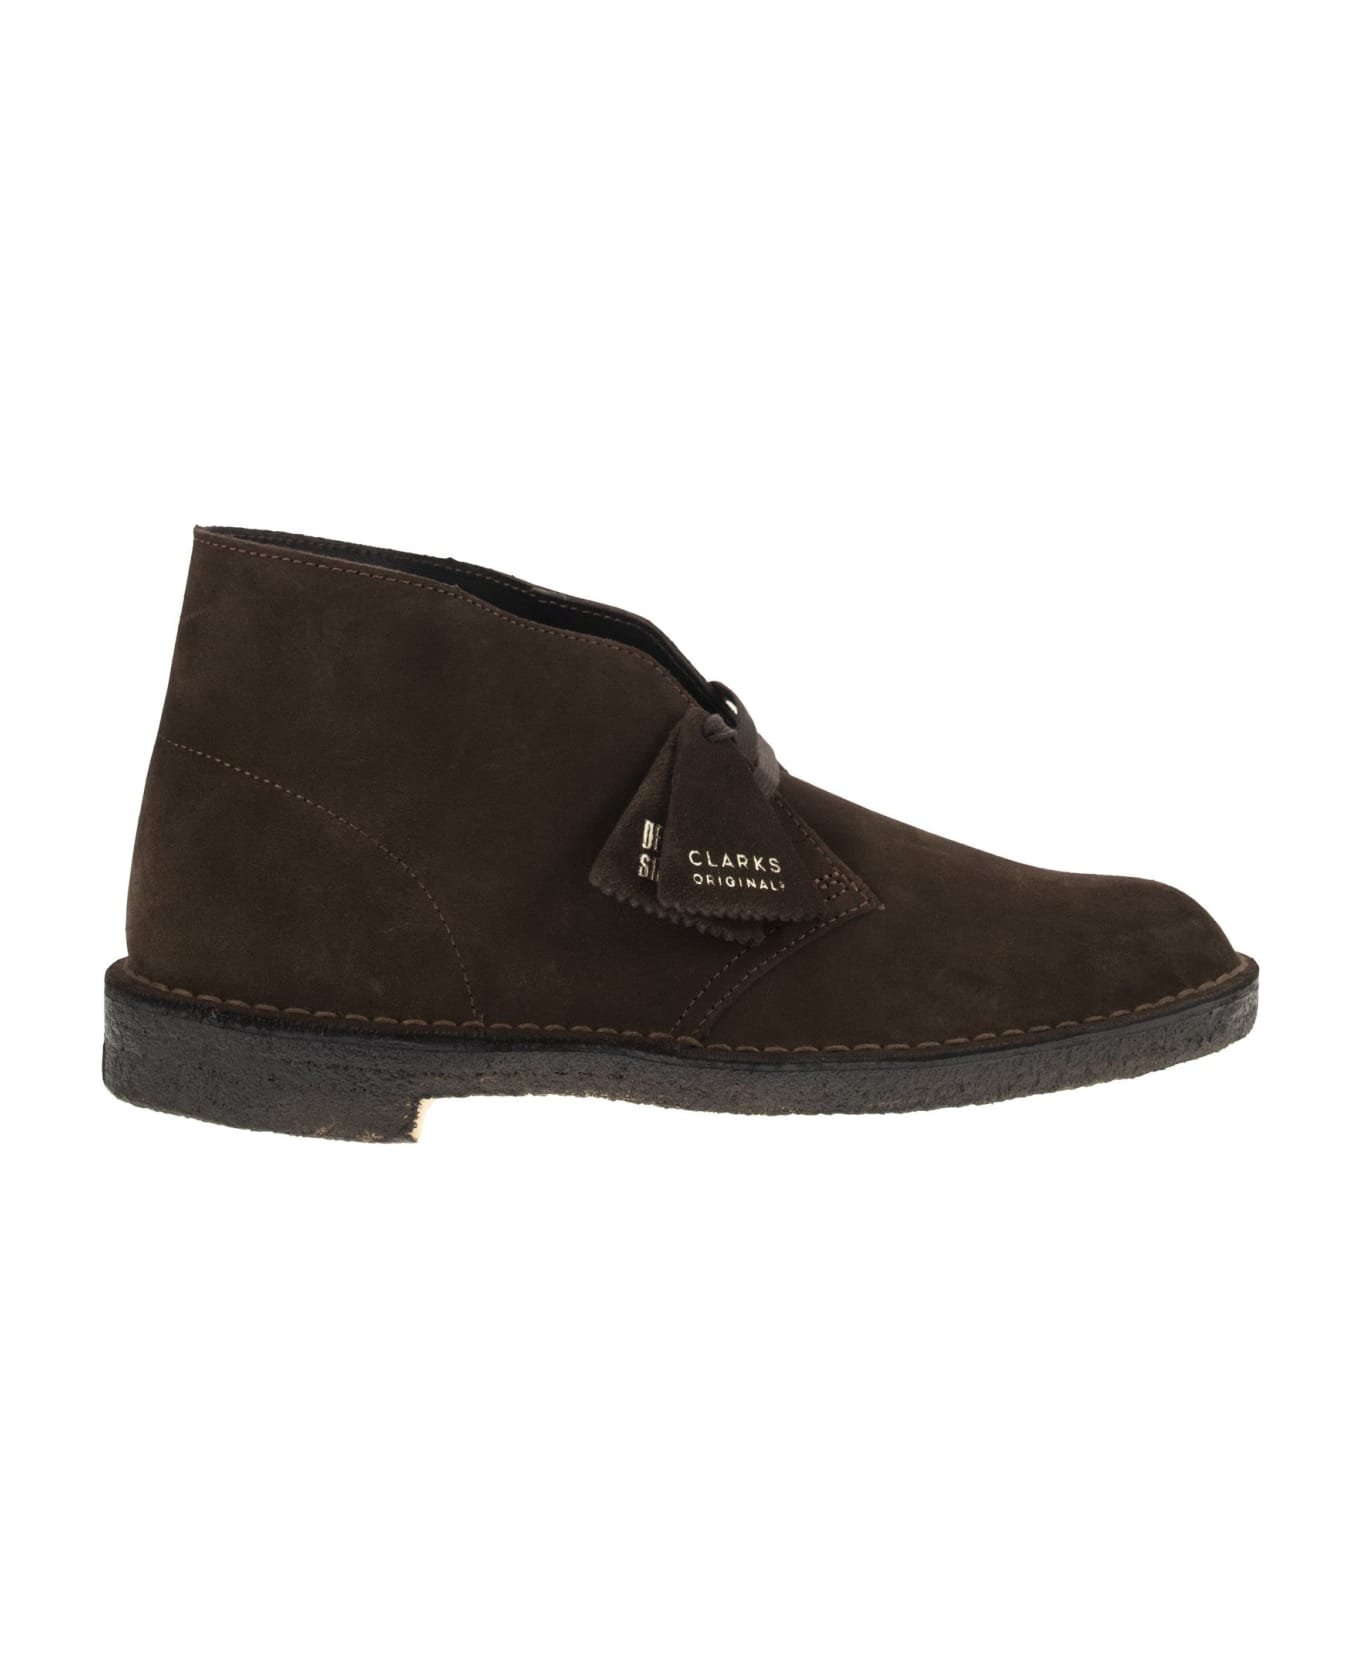 Clarks Desert Boot - Lace-up Boot - Brown ブーツ